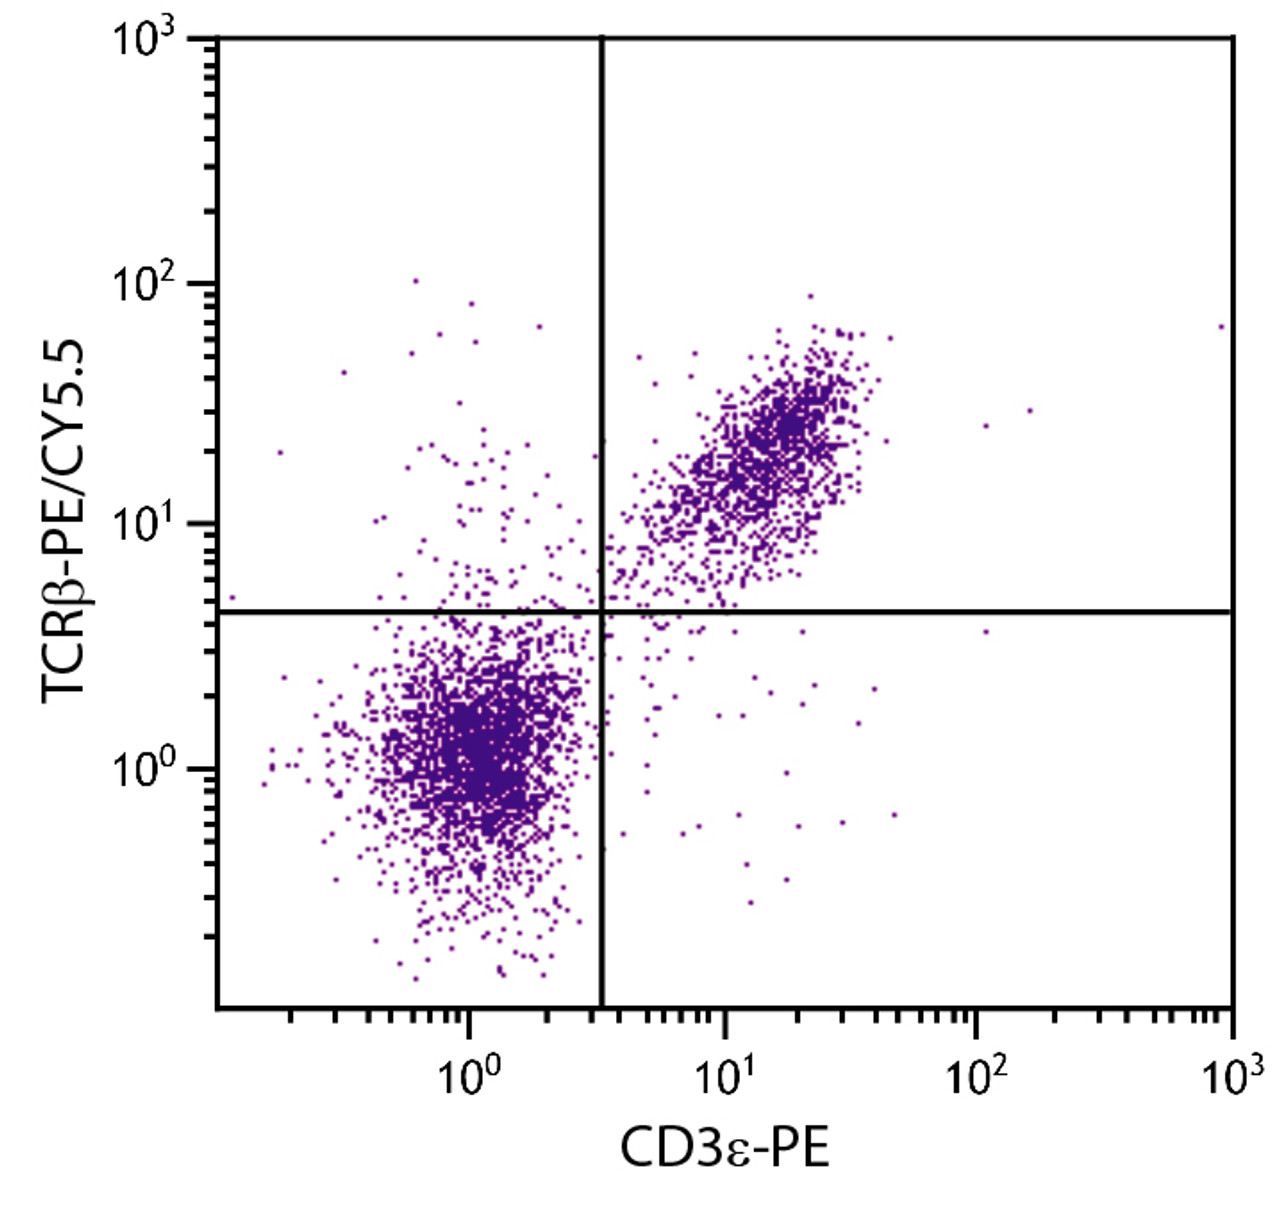 BALB/c mouse splenocytes were stained with Hamster Anti-Mouse TCR?-PE/CY5.5 (Cat. No. 98-905) and Rat Anti-Mouse CD3?-PE .